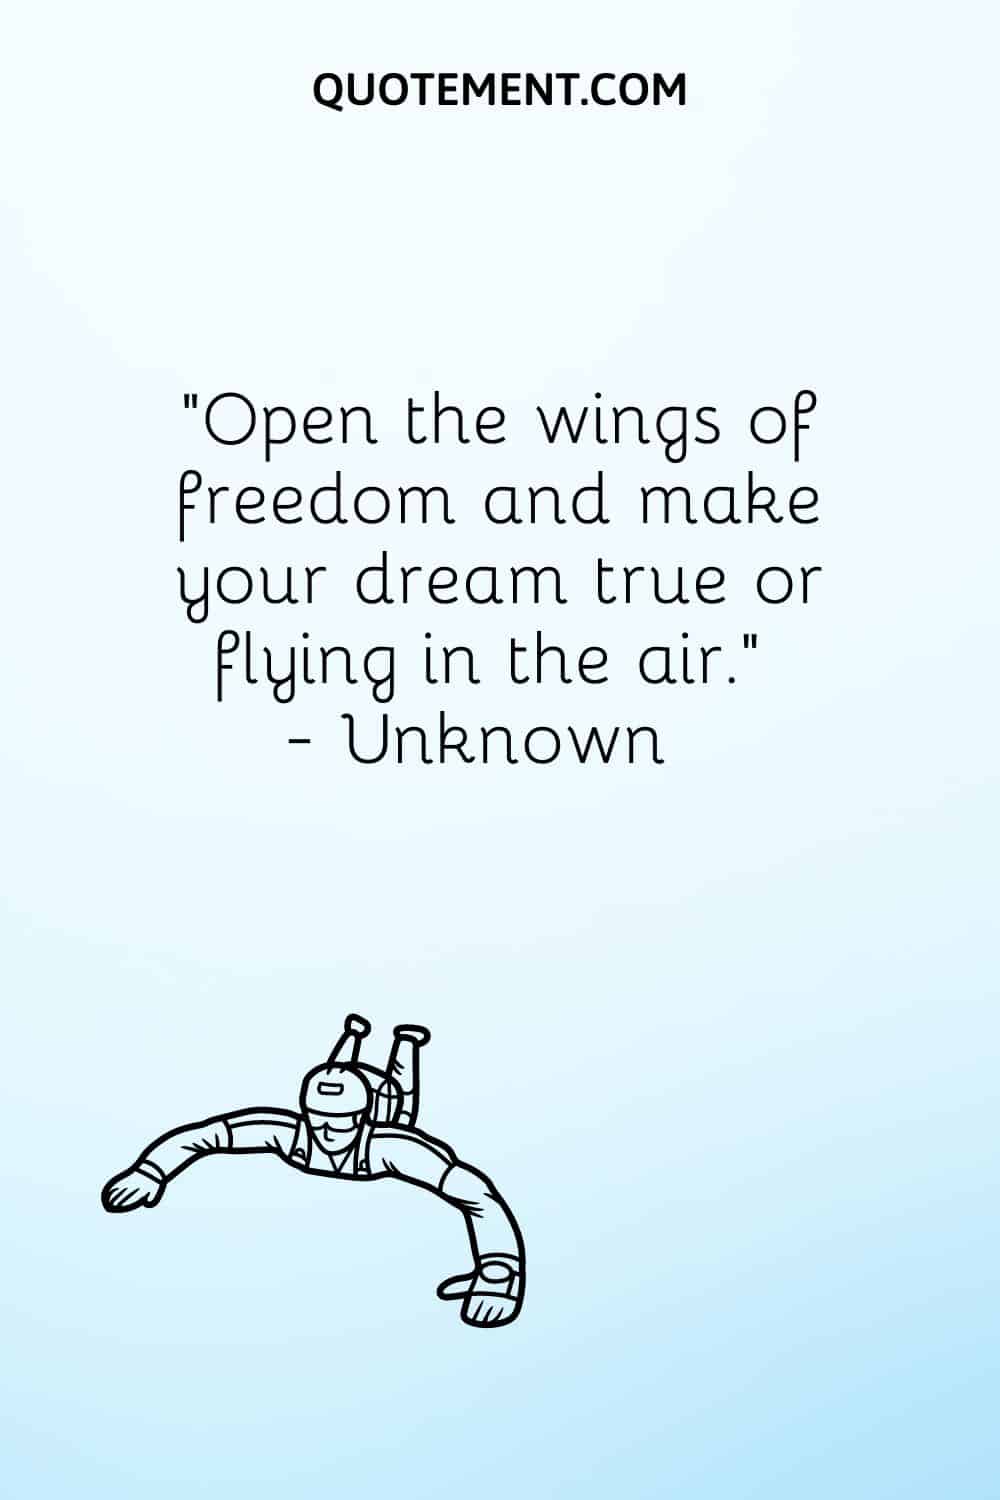 Open the wings of freedom and make your dream true or flying in the air.